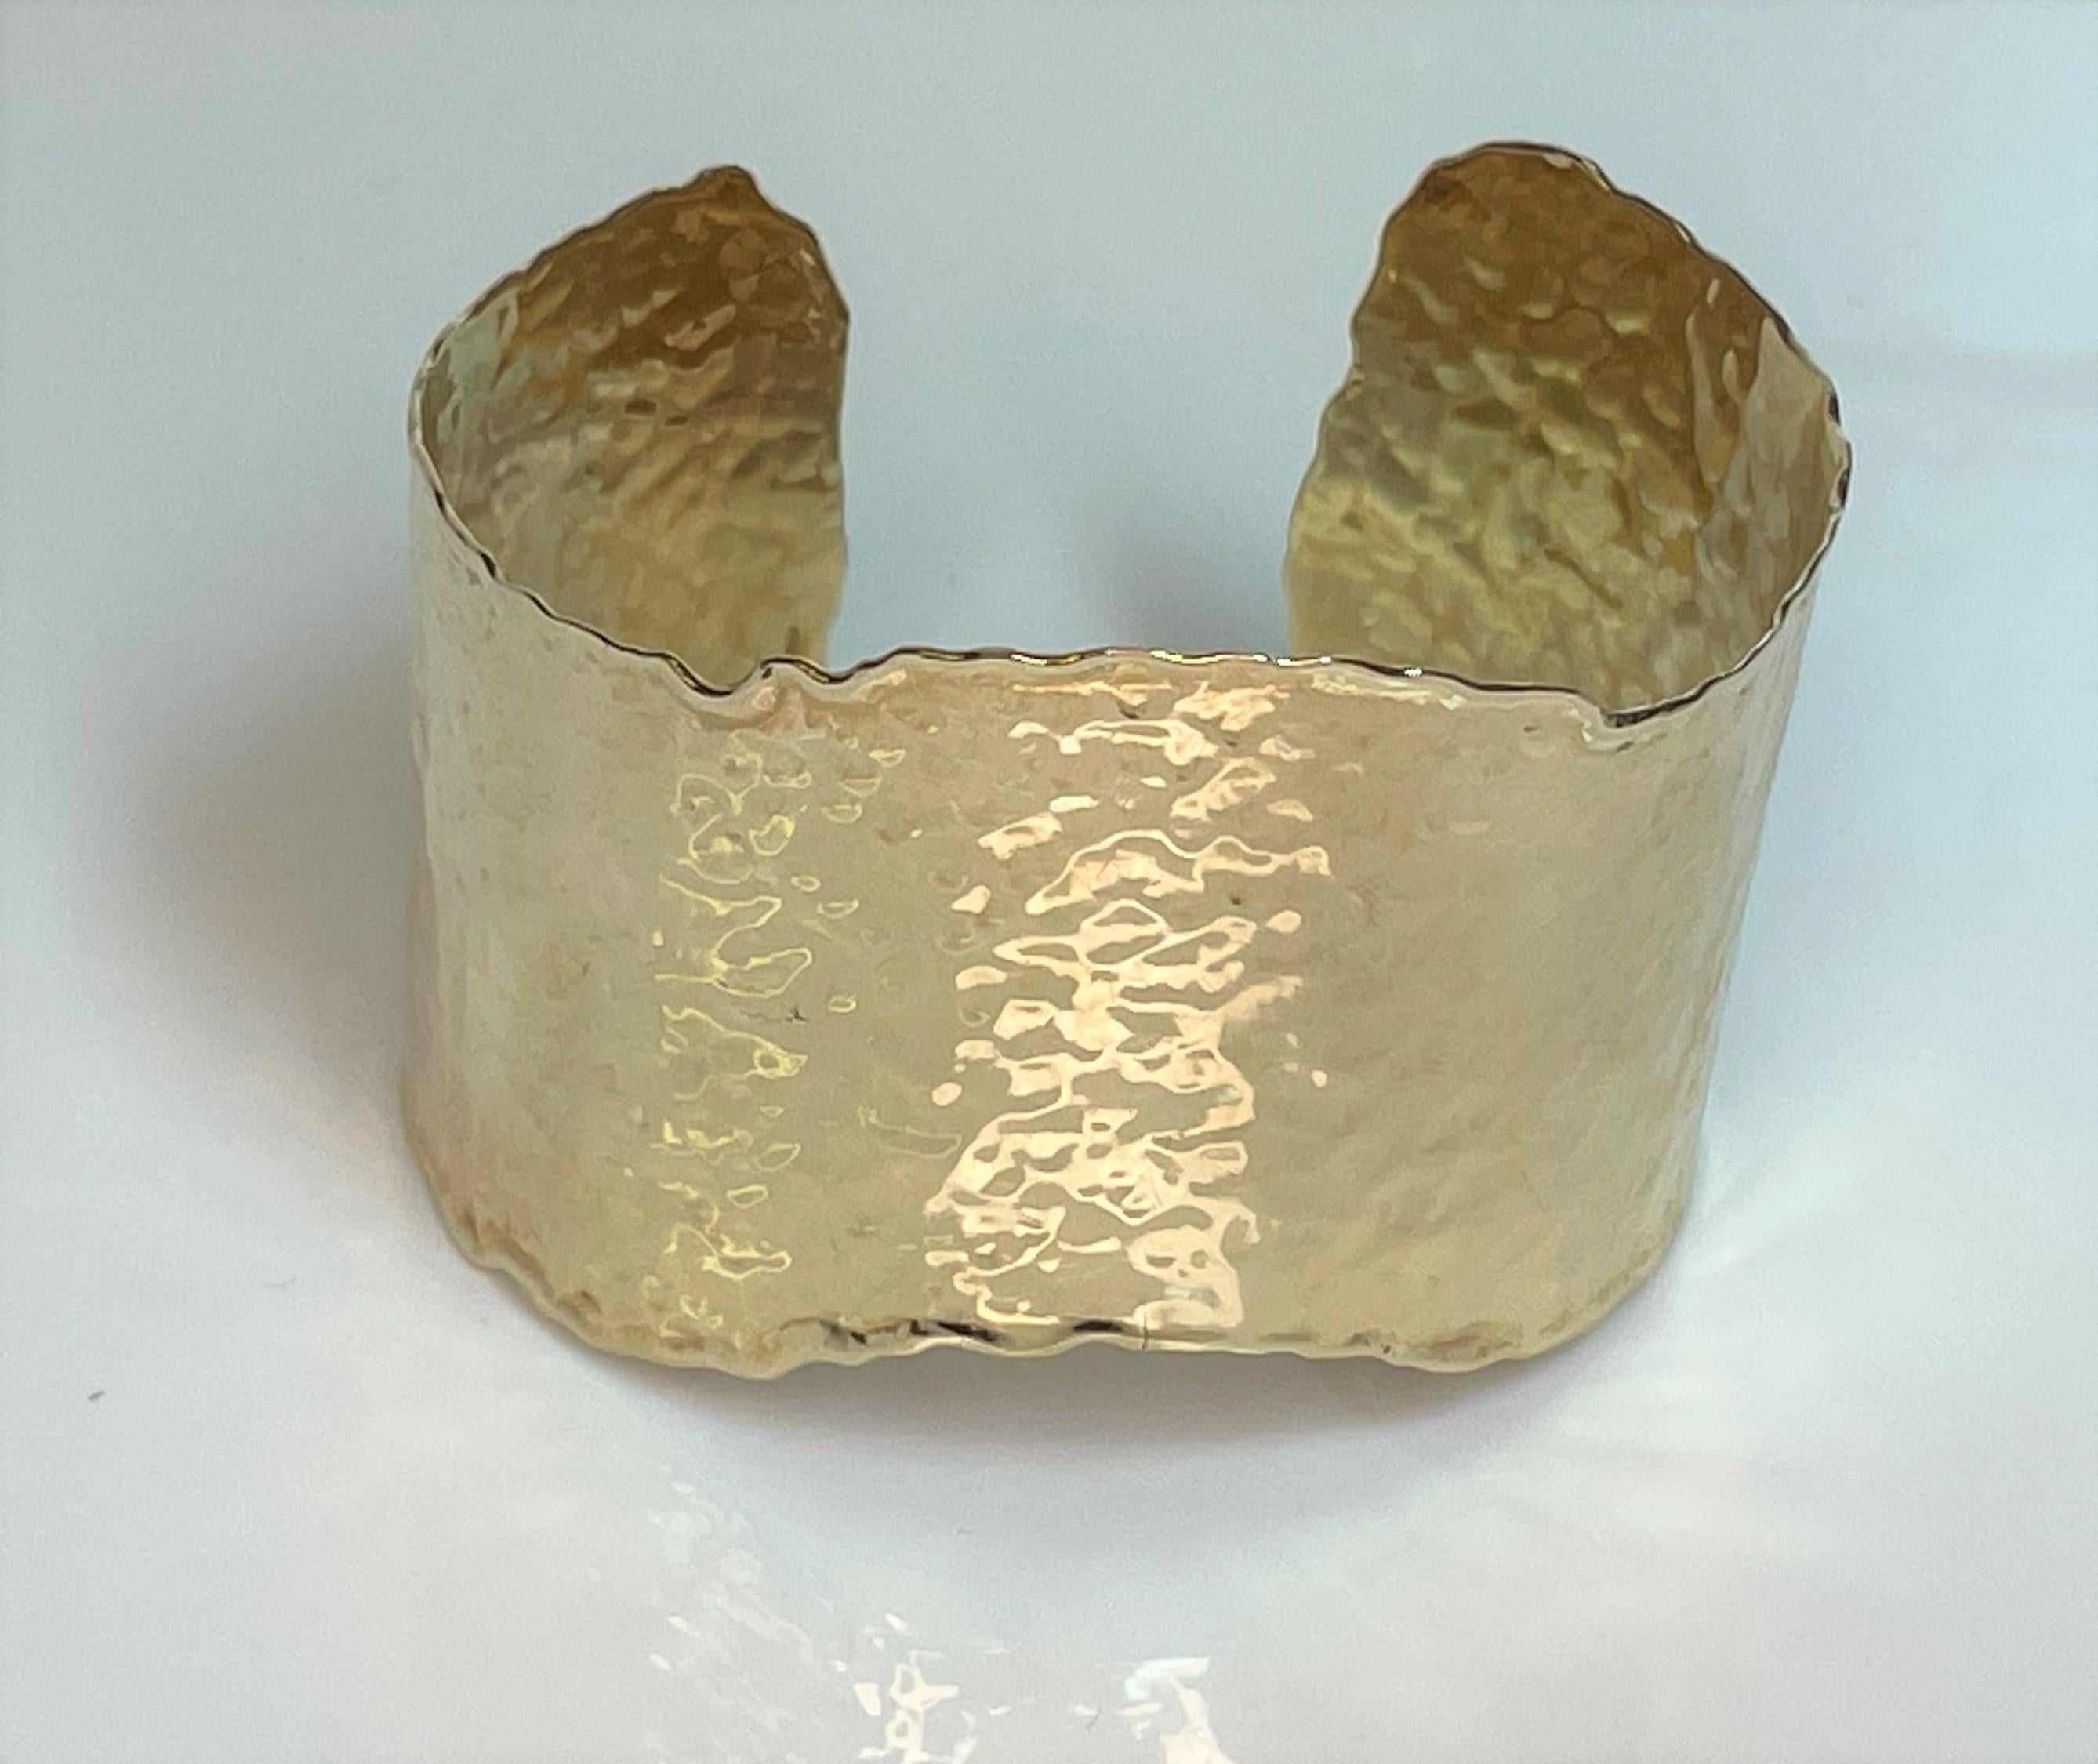 This unique curved style bracelet is sure to grab attention and is an easy to wear everyday piece.
14 karat hammered yellow gold finish.
Scallop curved design.
Approximately 37mm wide.
